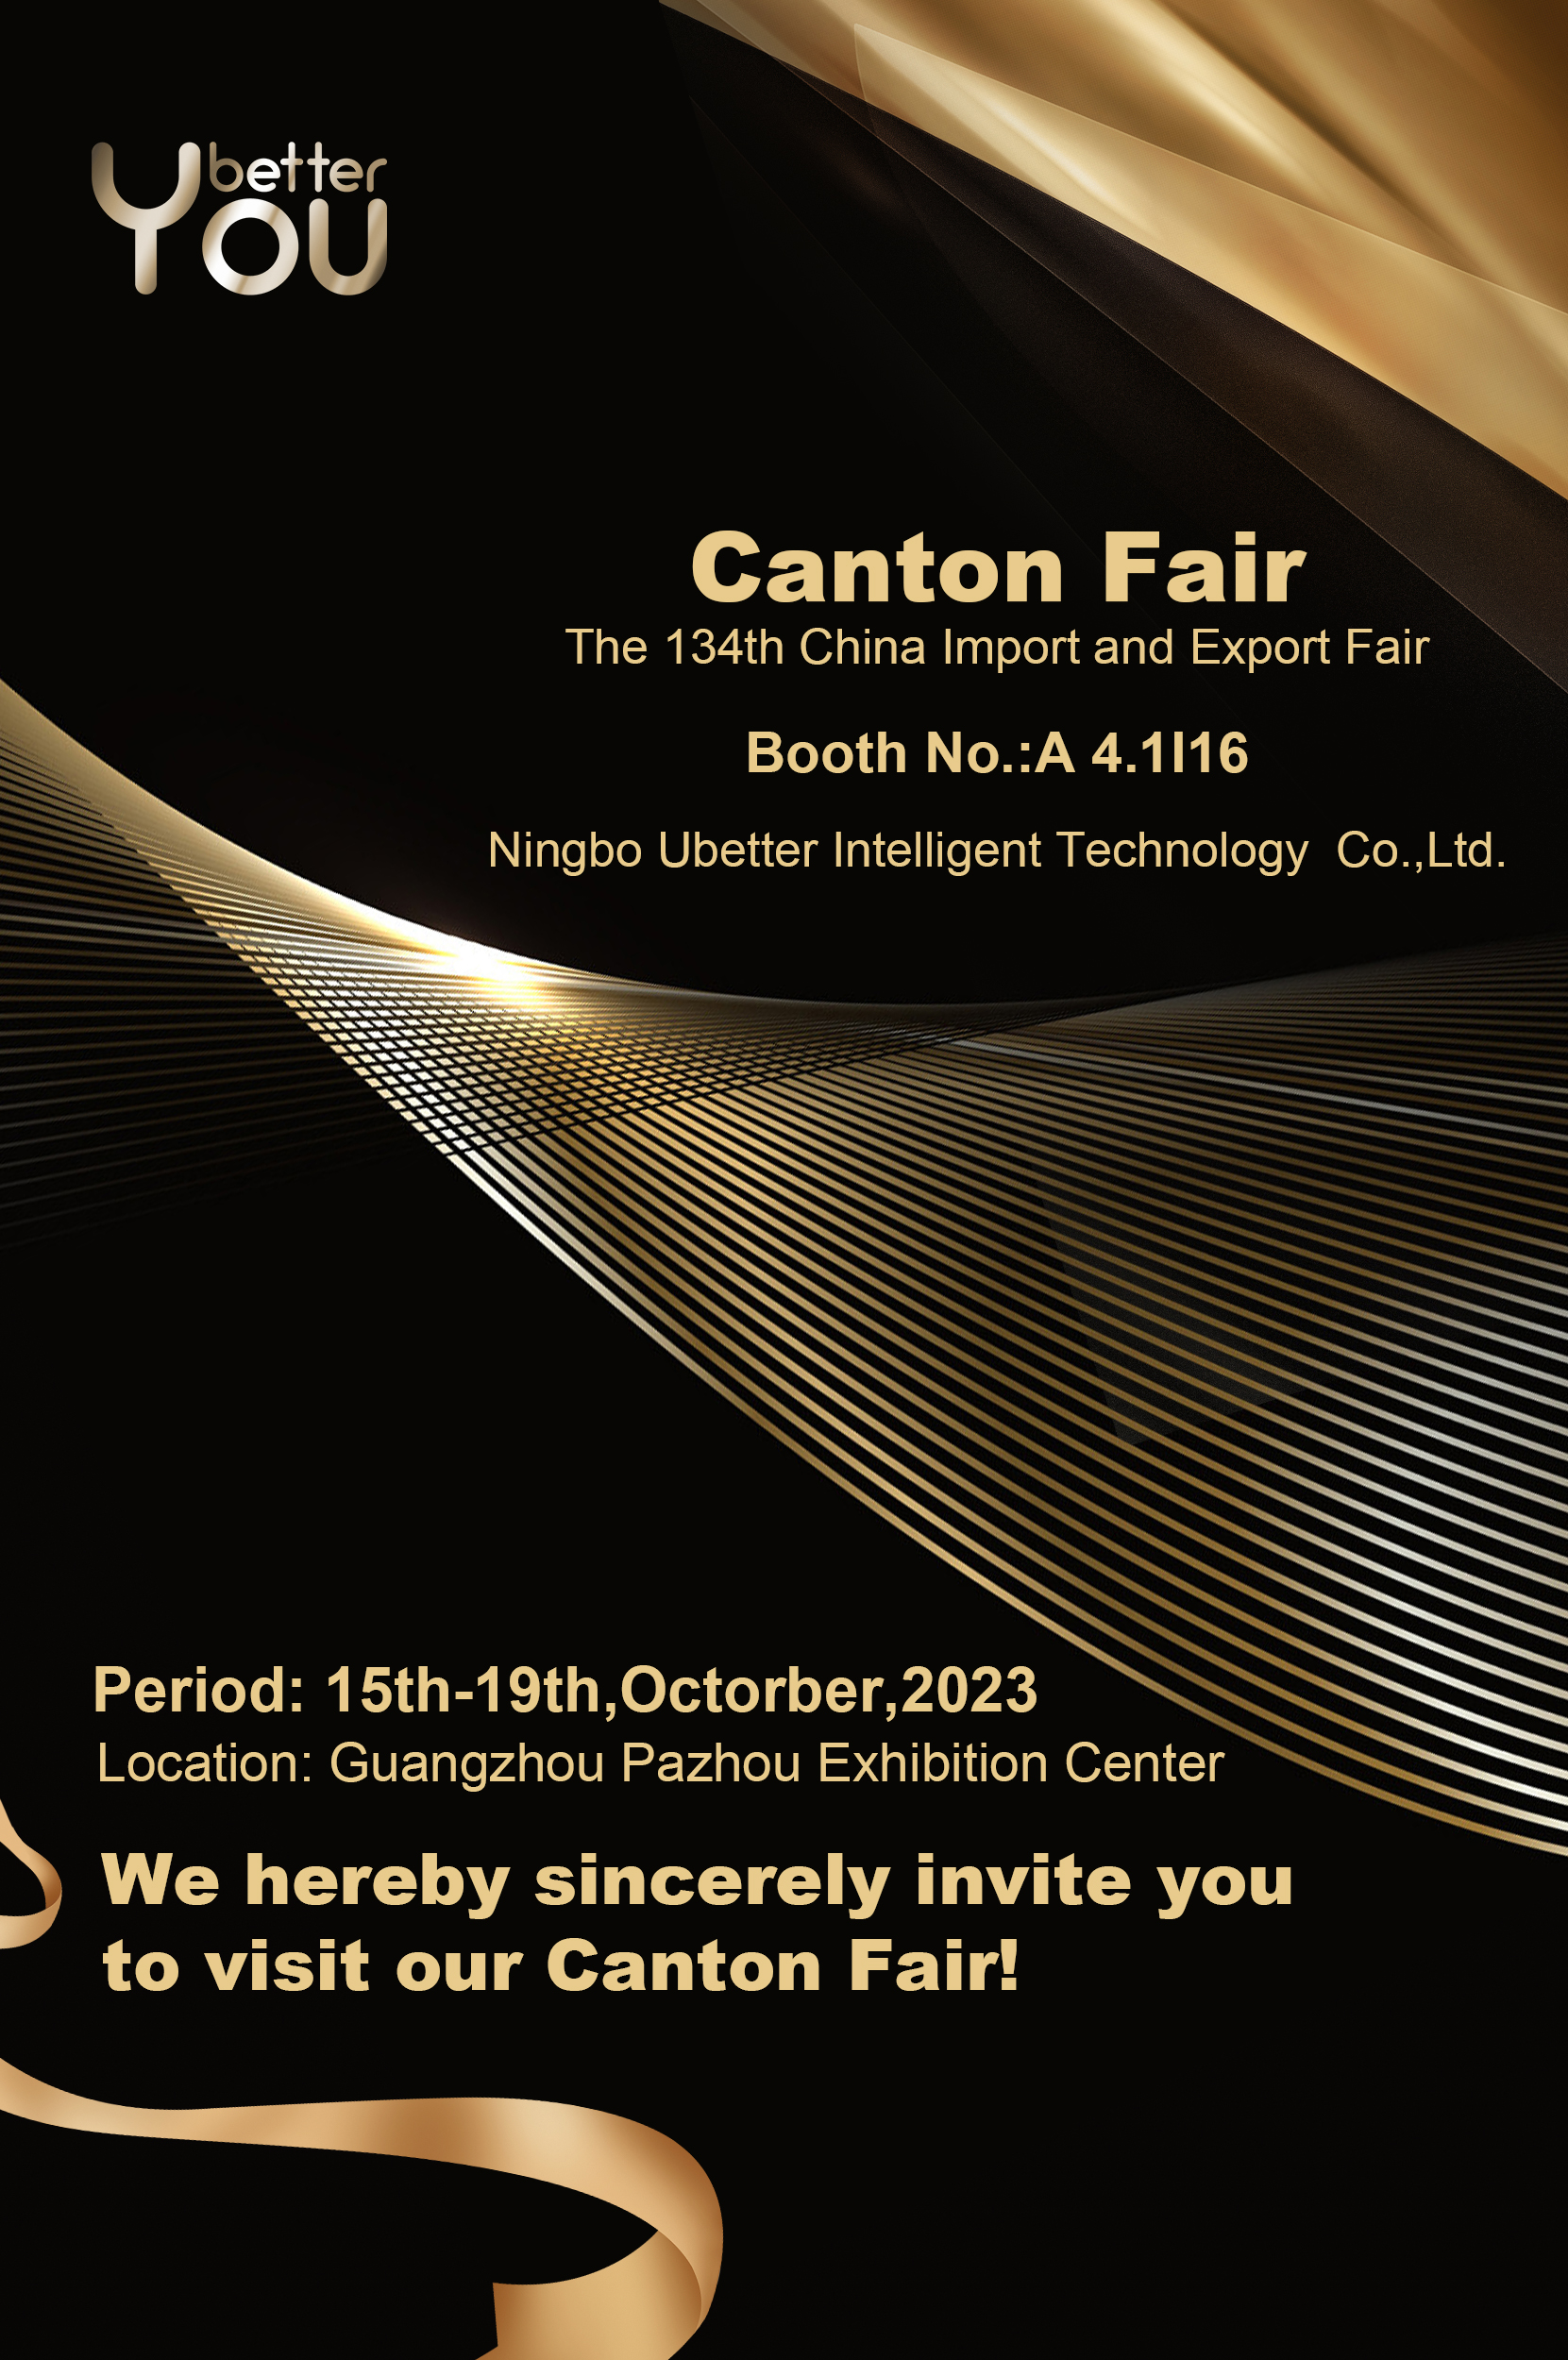 Ningbo Ubetter company to Showcase Exciting New Products at Canton Fair